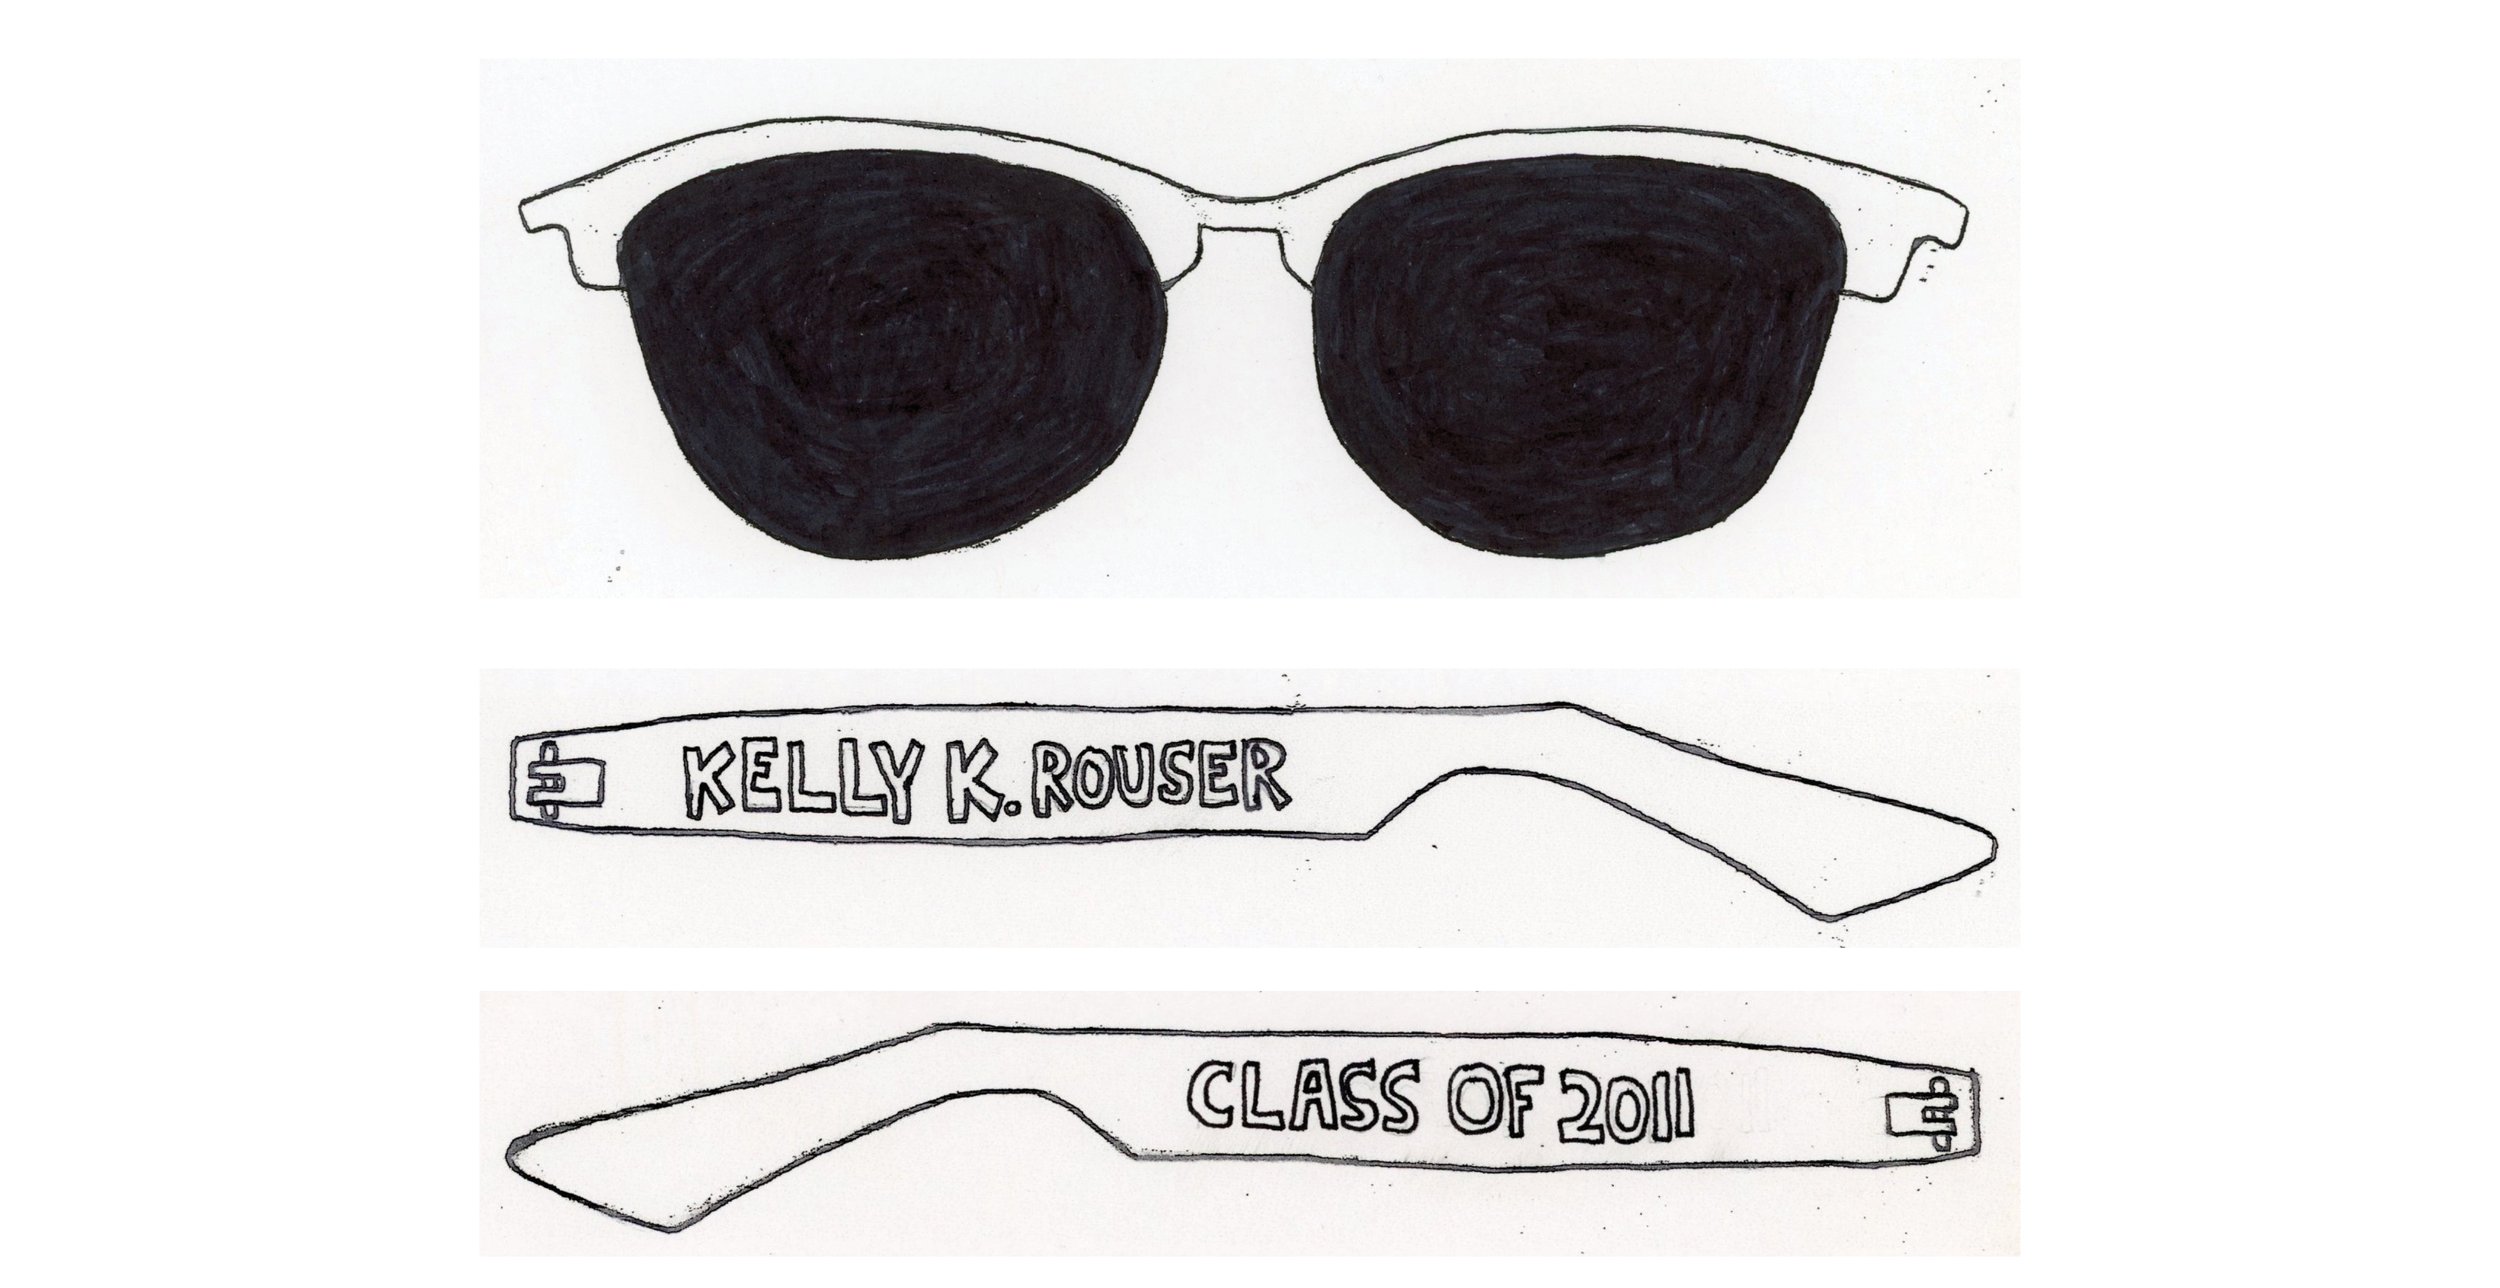 Drawings of an Eyewear-Related Product Concept